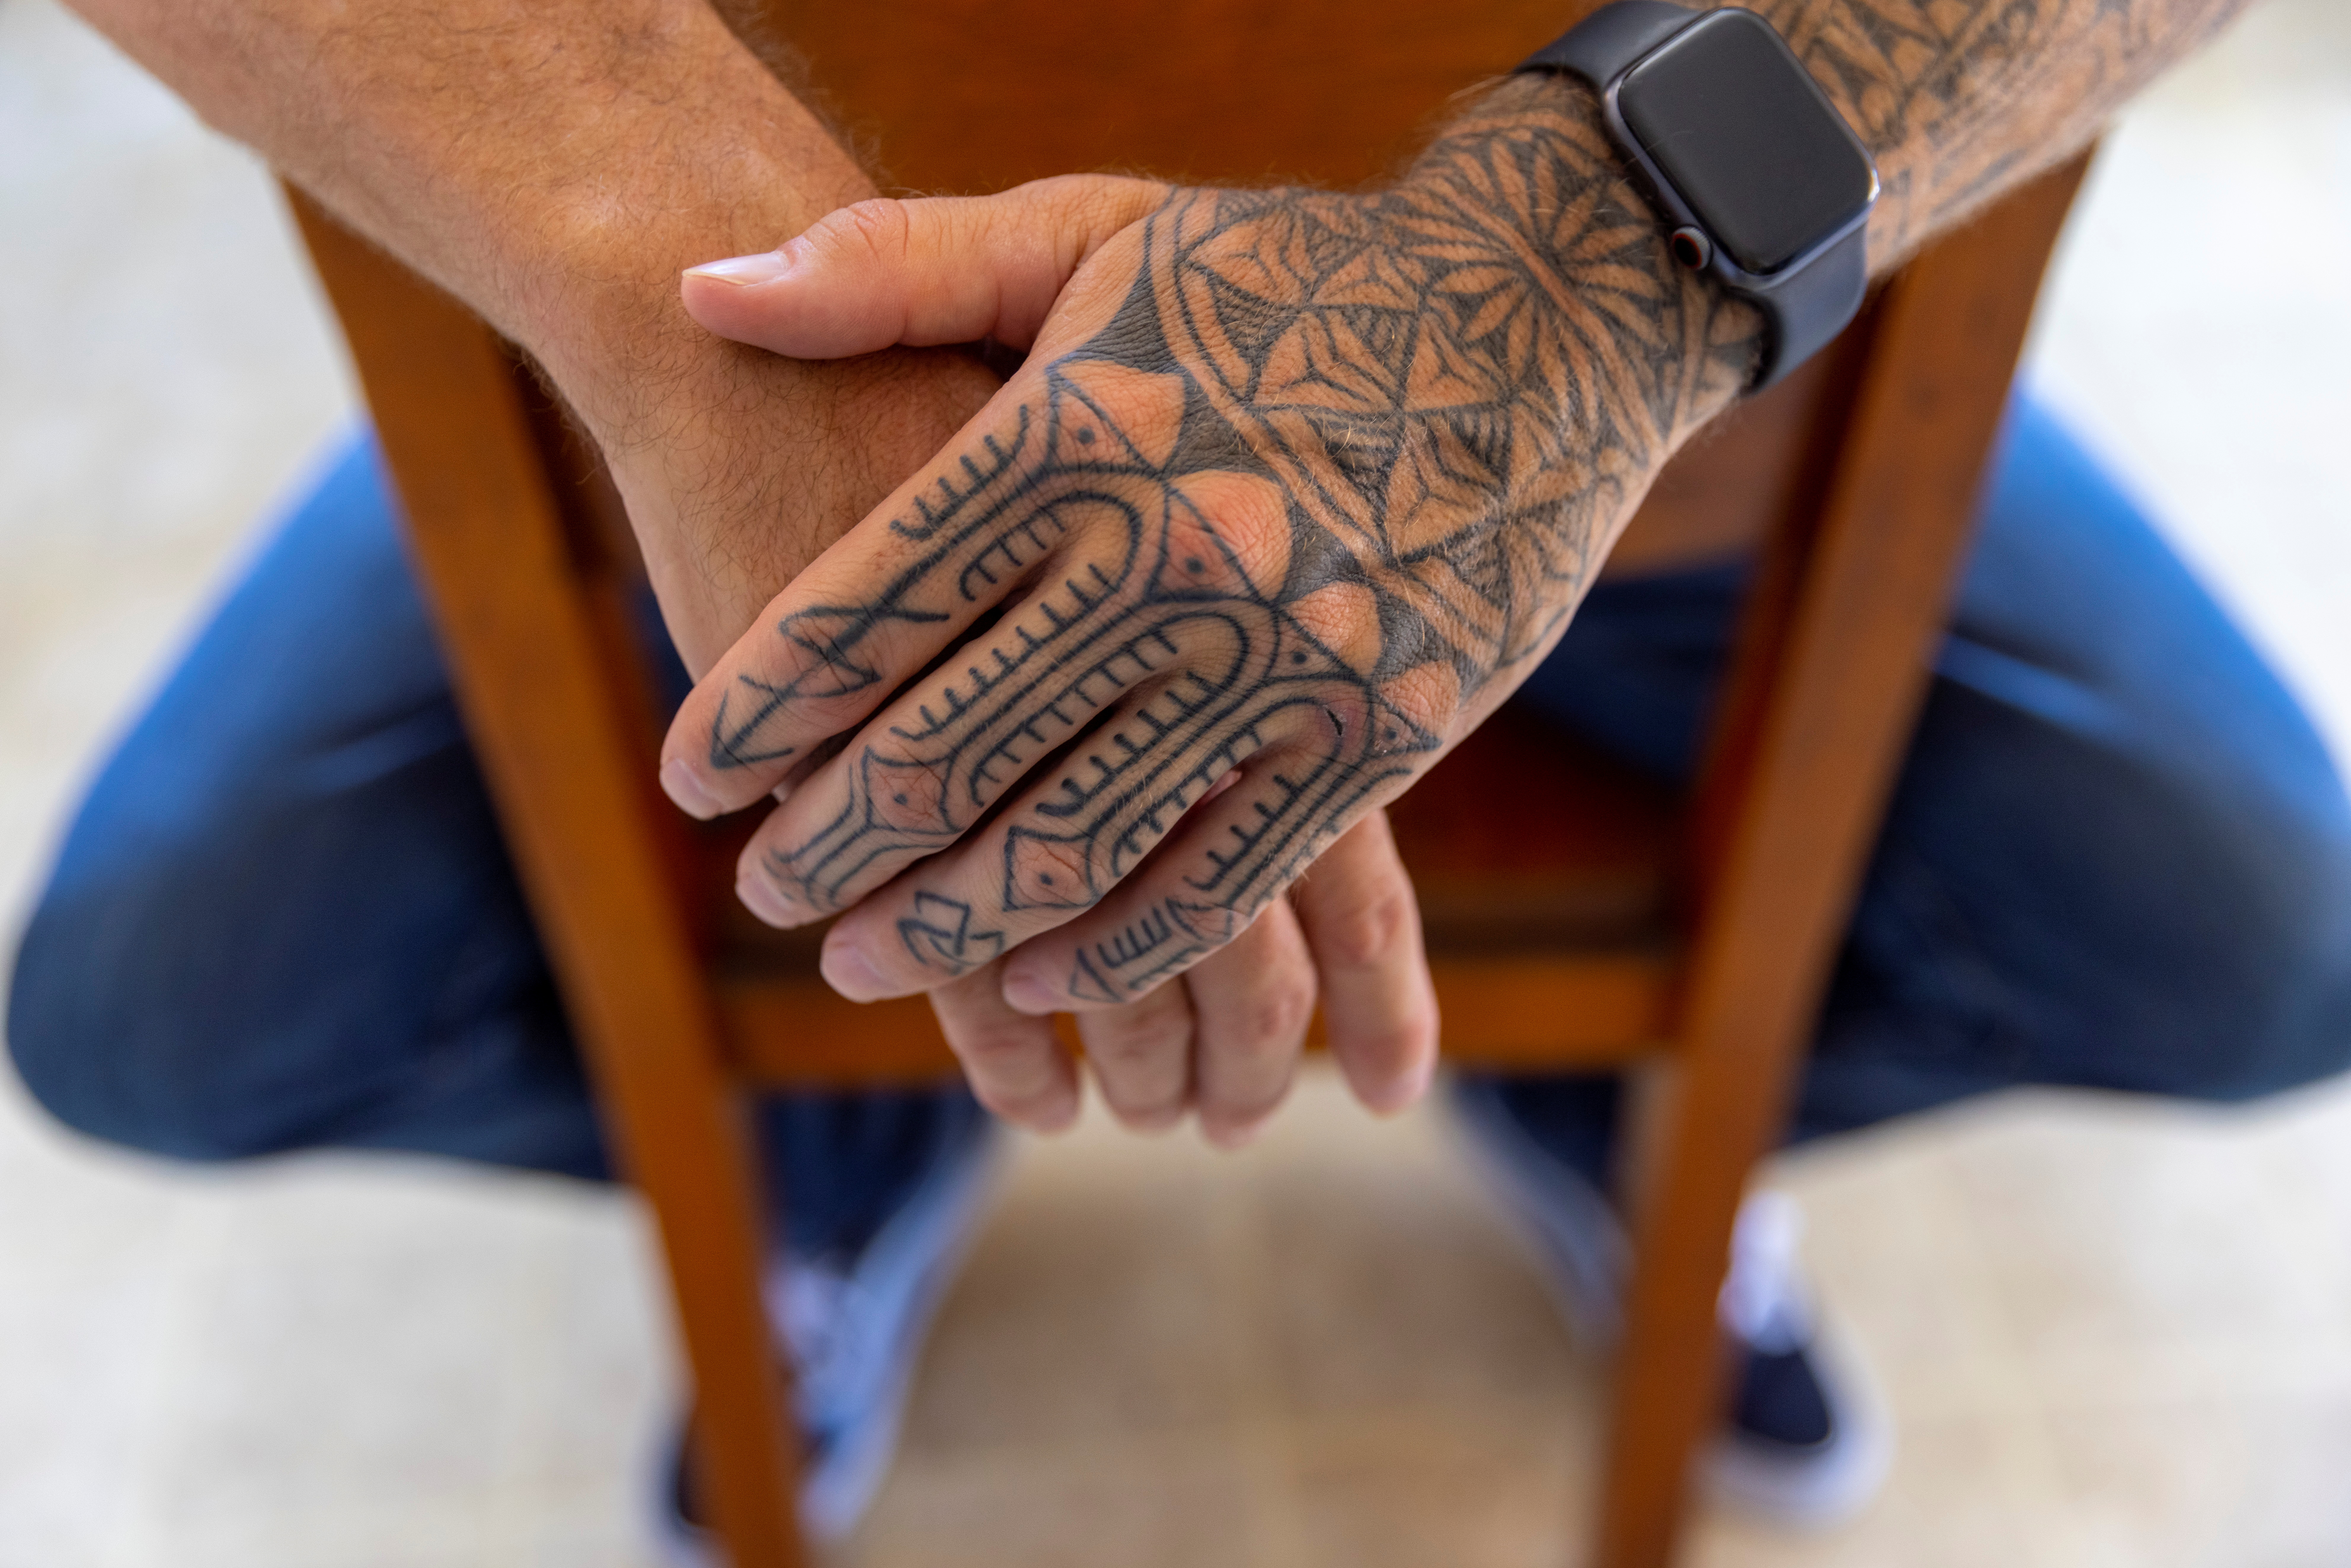 Tattoos are shown on the arm U.S special forces veteran Jason Lilley as he poses for a portrait at his home in Garden Grove, California, U.S.,  July 9, 2021. Lilley spoke to Reuters about his experience in Afghanistan and his thoughts as the U.S. leaves the country.  Picture taken July 9, 202.   REUTERS/Mike Blake